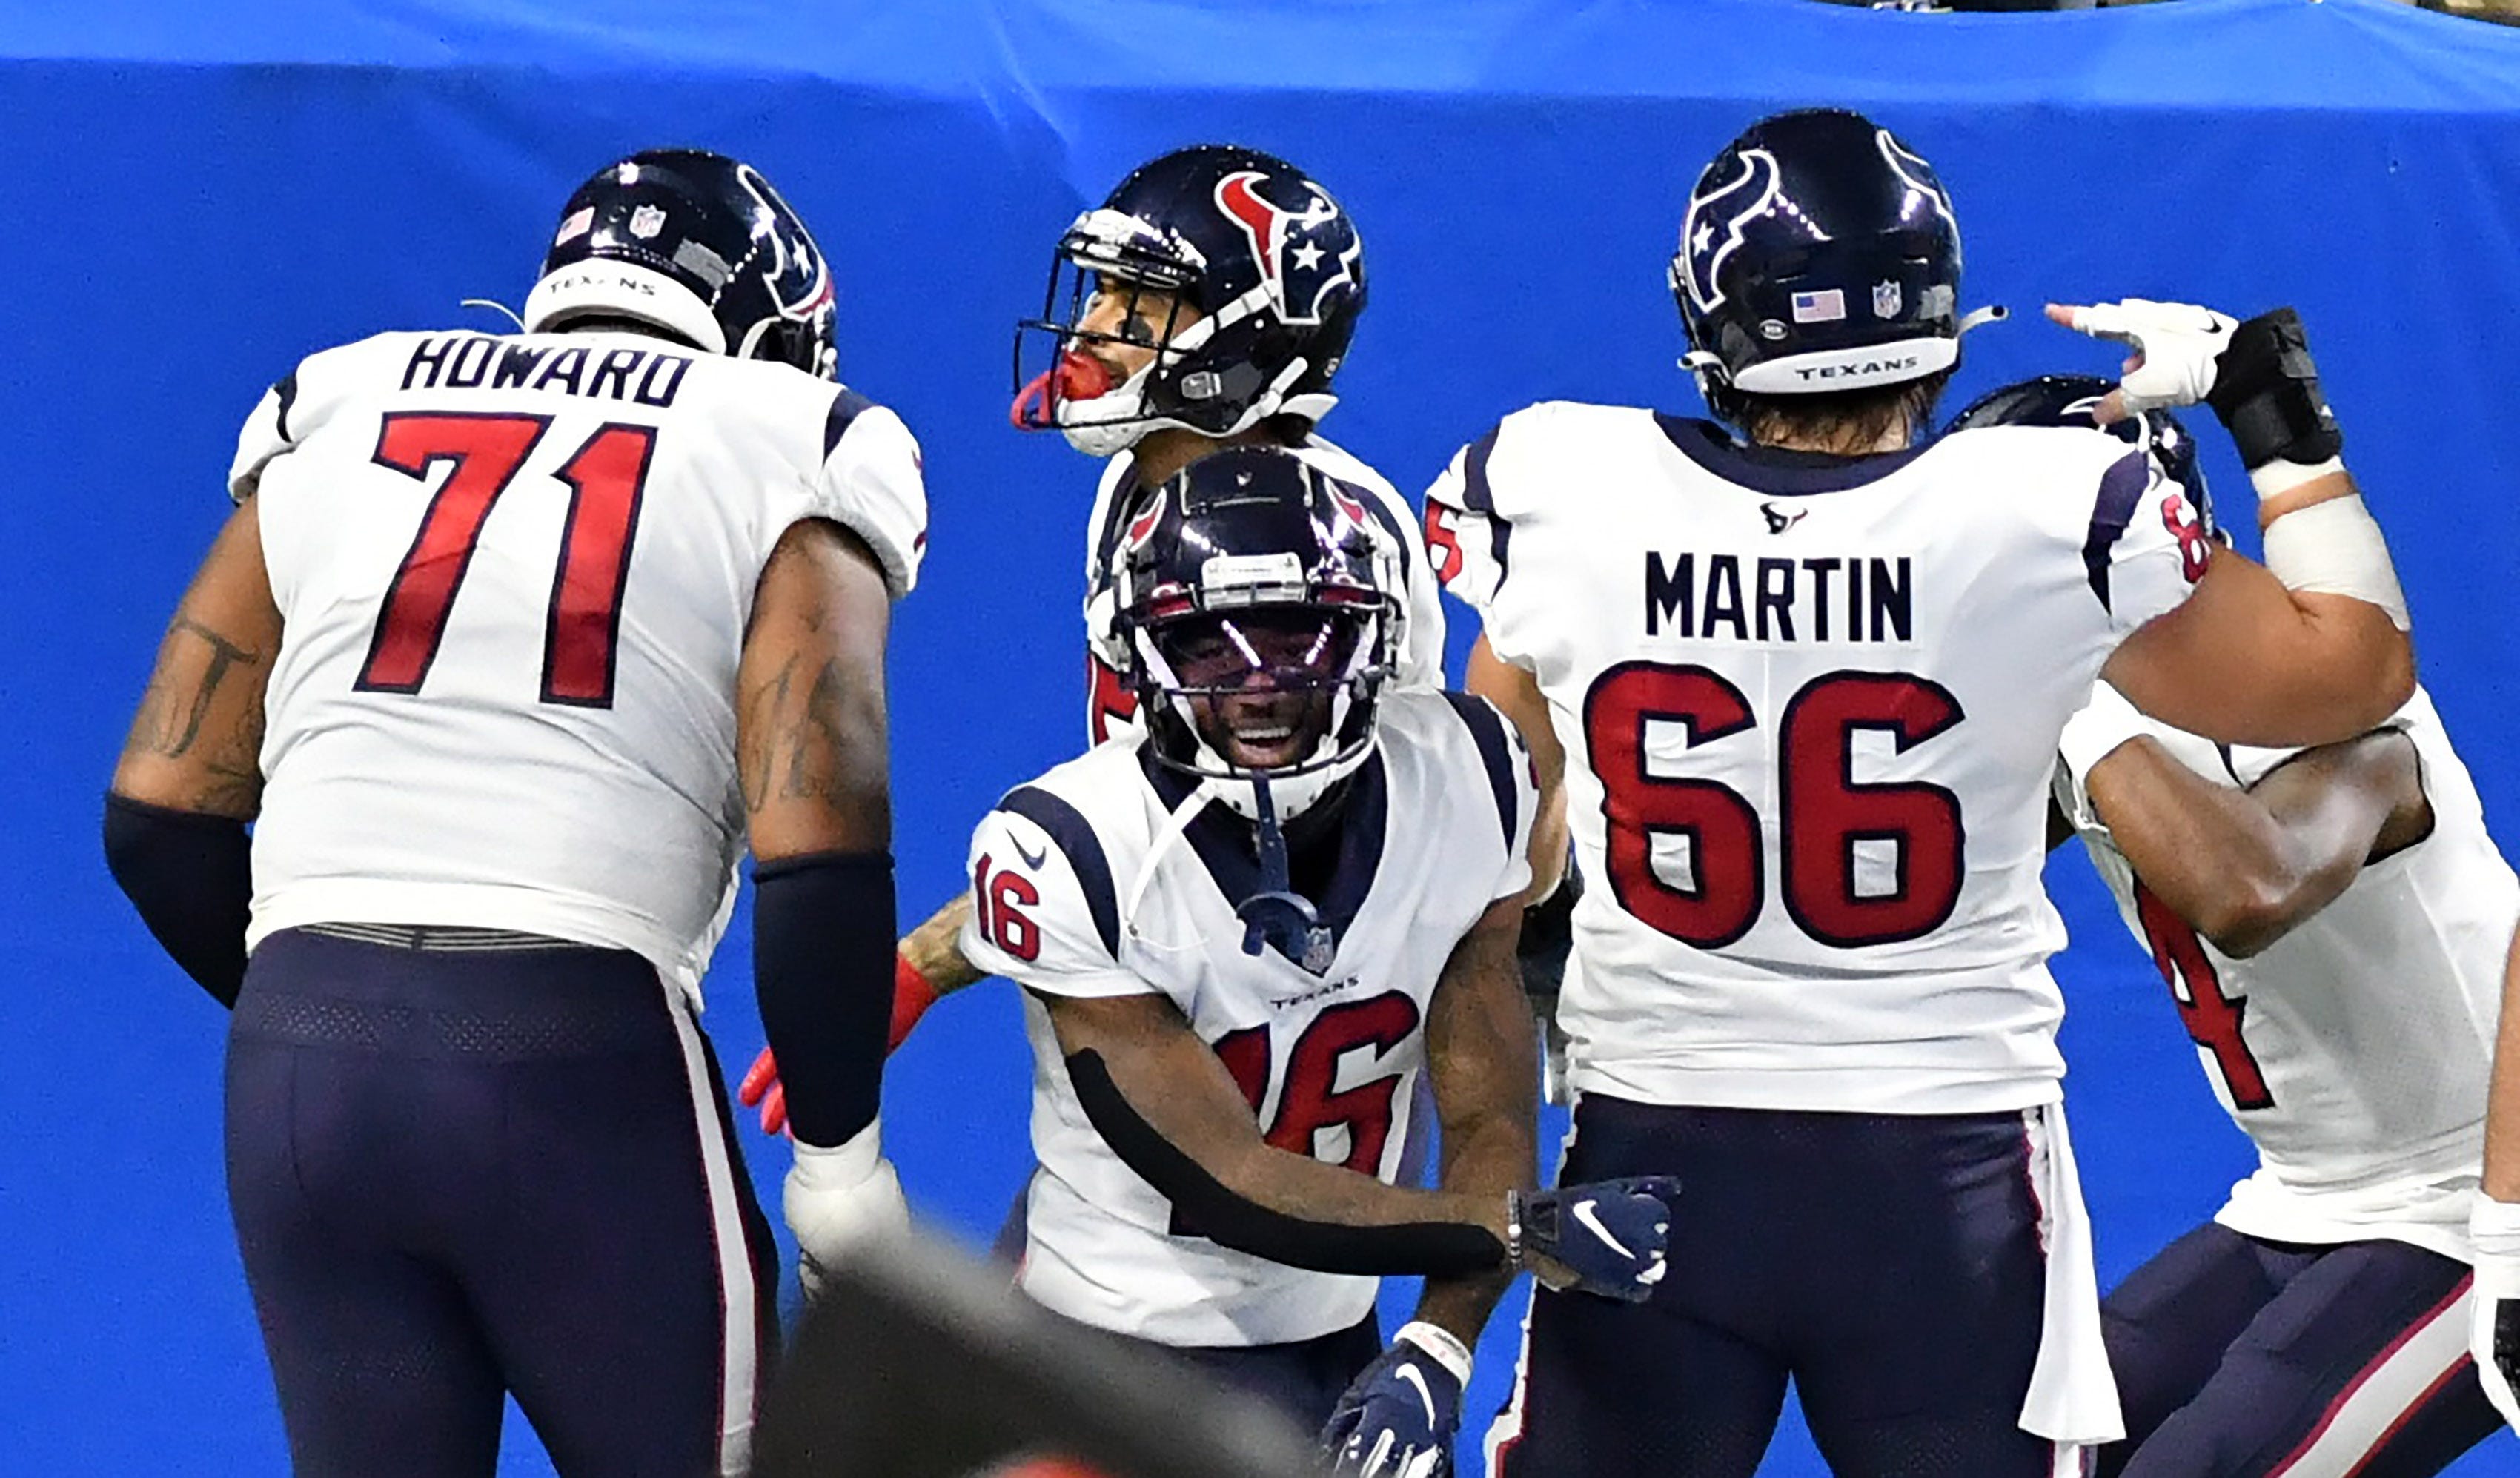 Texans offensive tackle Tytus Howard (71), wide receiver Keke Coutee (16), and center Nick Martin (66) celebrate a touchdown by wide receiver Will Fuller (15) in the fourth quarter.